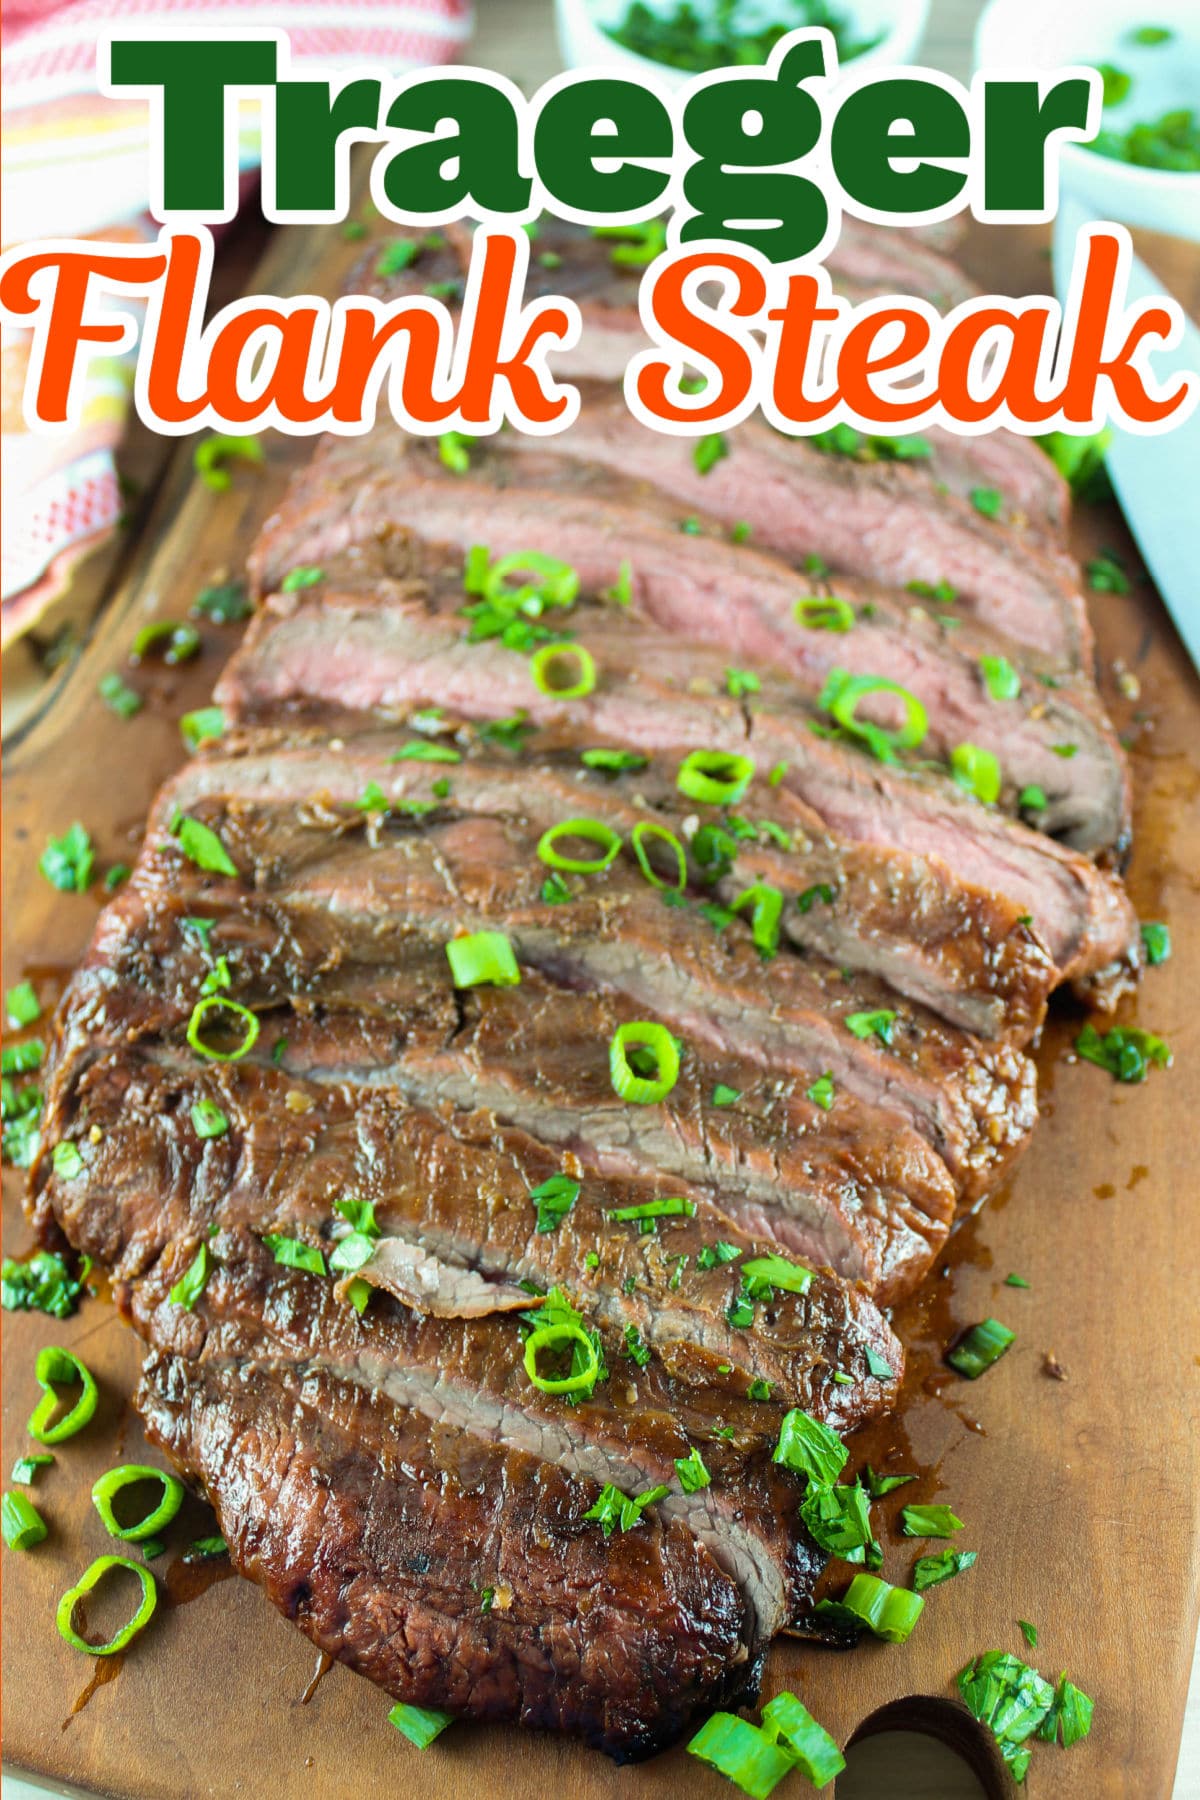 Traeger Flank Steak is so amazing! The delicious flavors from this simple marinade are only enhanced by the smokiness of the Traeger pellets. This smoked flank steak will make everyone huge fans of this hidden gem cut of beef.  via @foodhussy